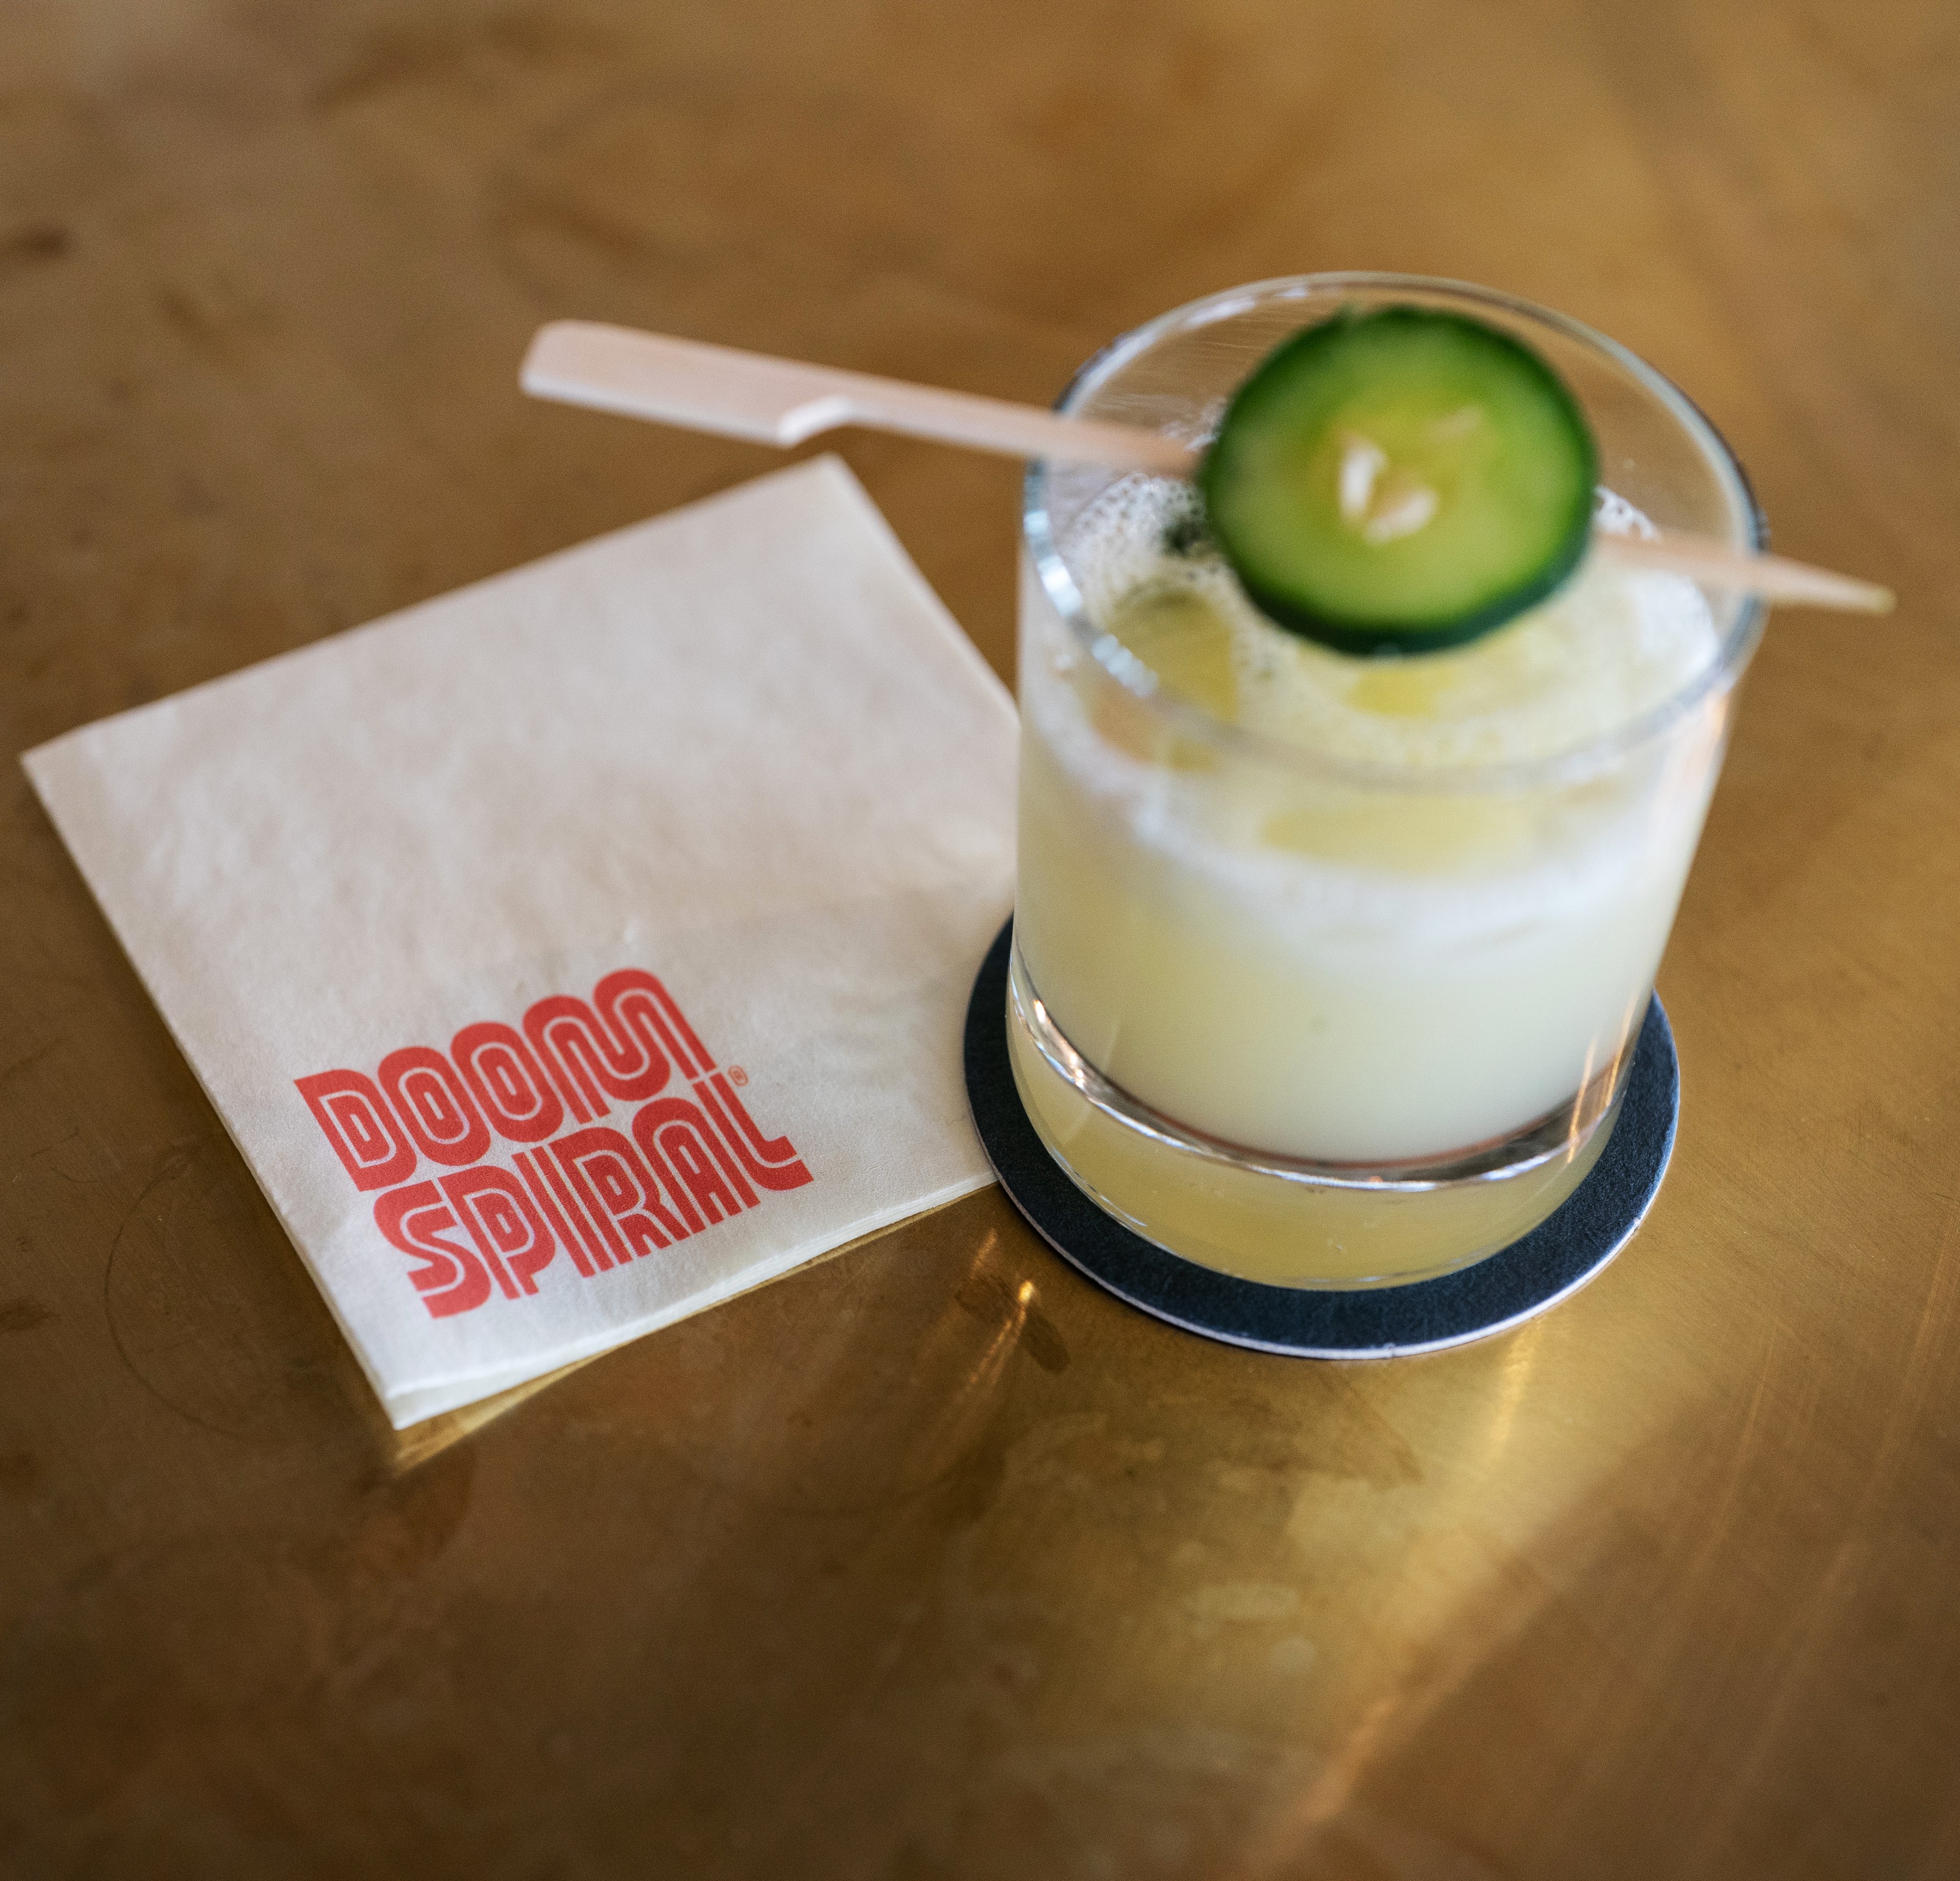 A creamy-looking cocktail with a cucumber slice garnish sits on a dark coaster next to a napkin that reads &quot;DOOM SPIRAL&quot; in red text.